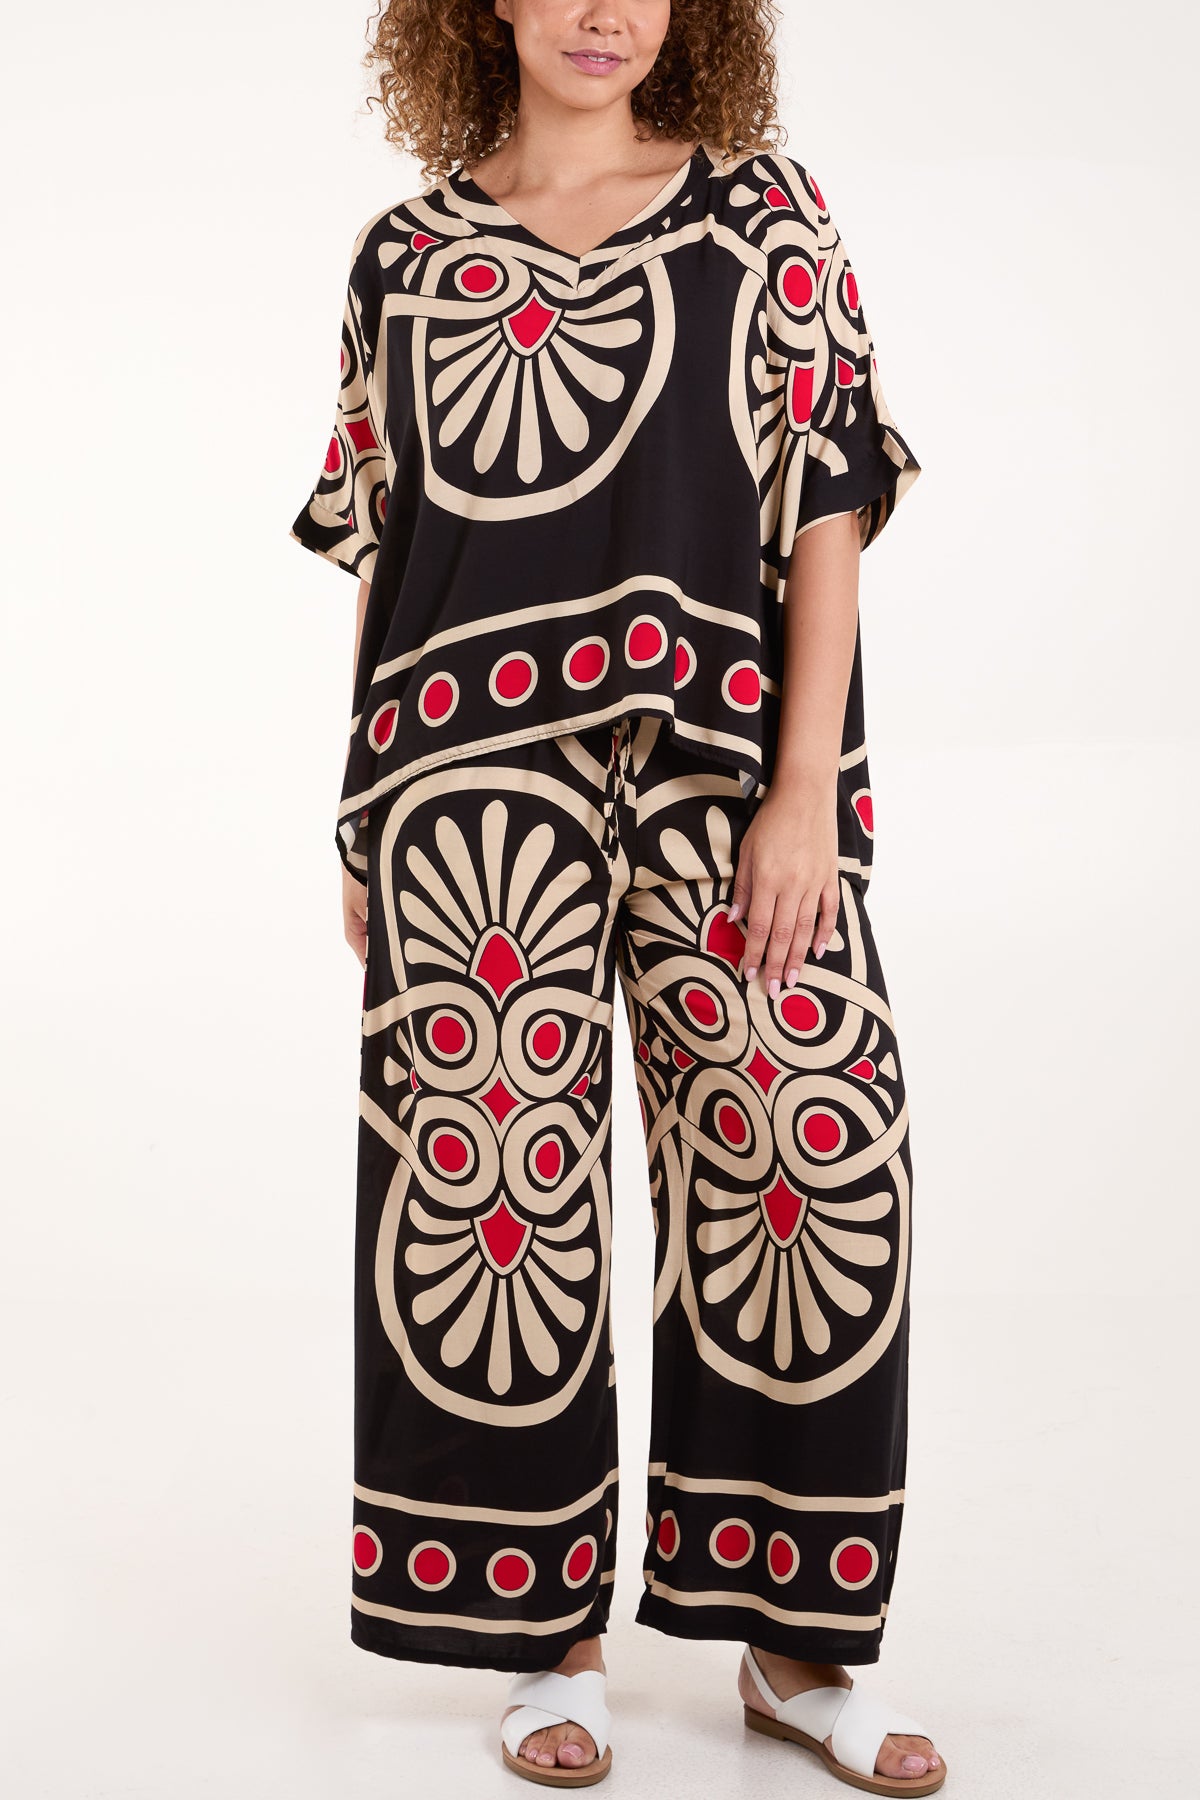 Aztec Bold Print Top and Trousers Set